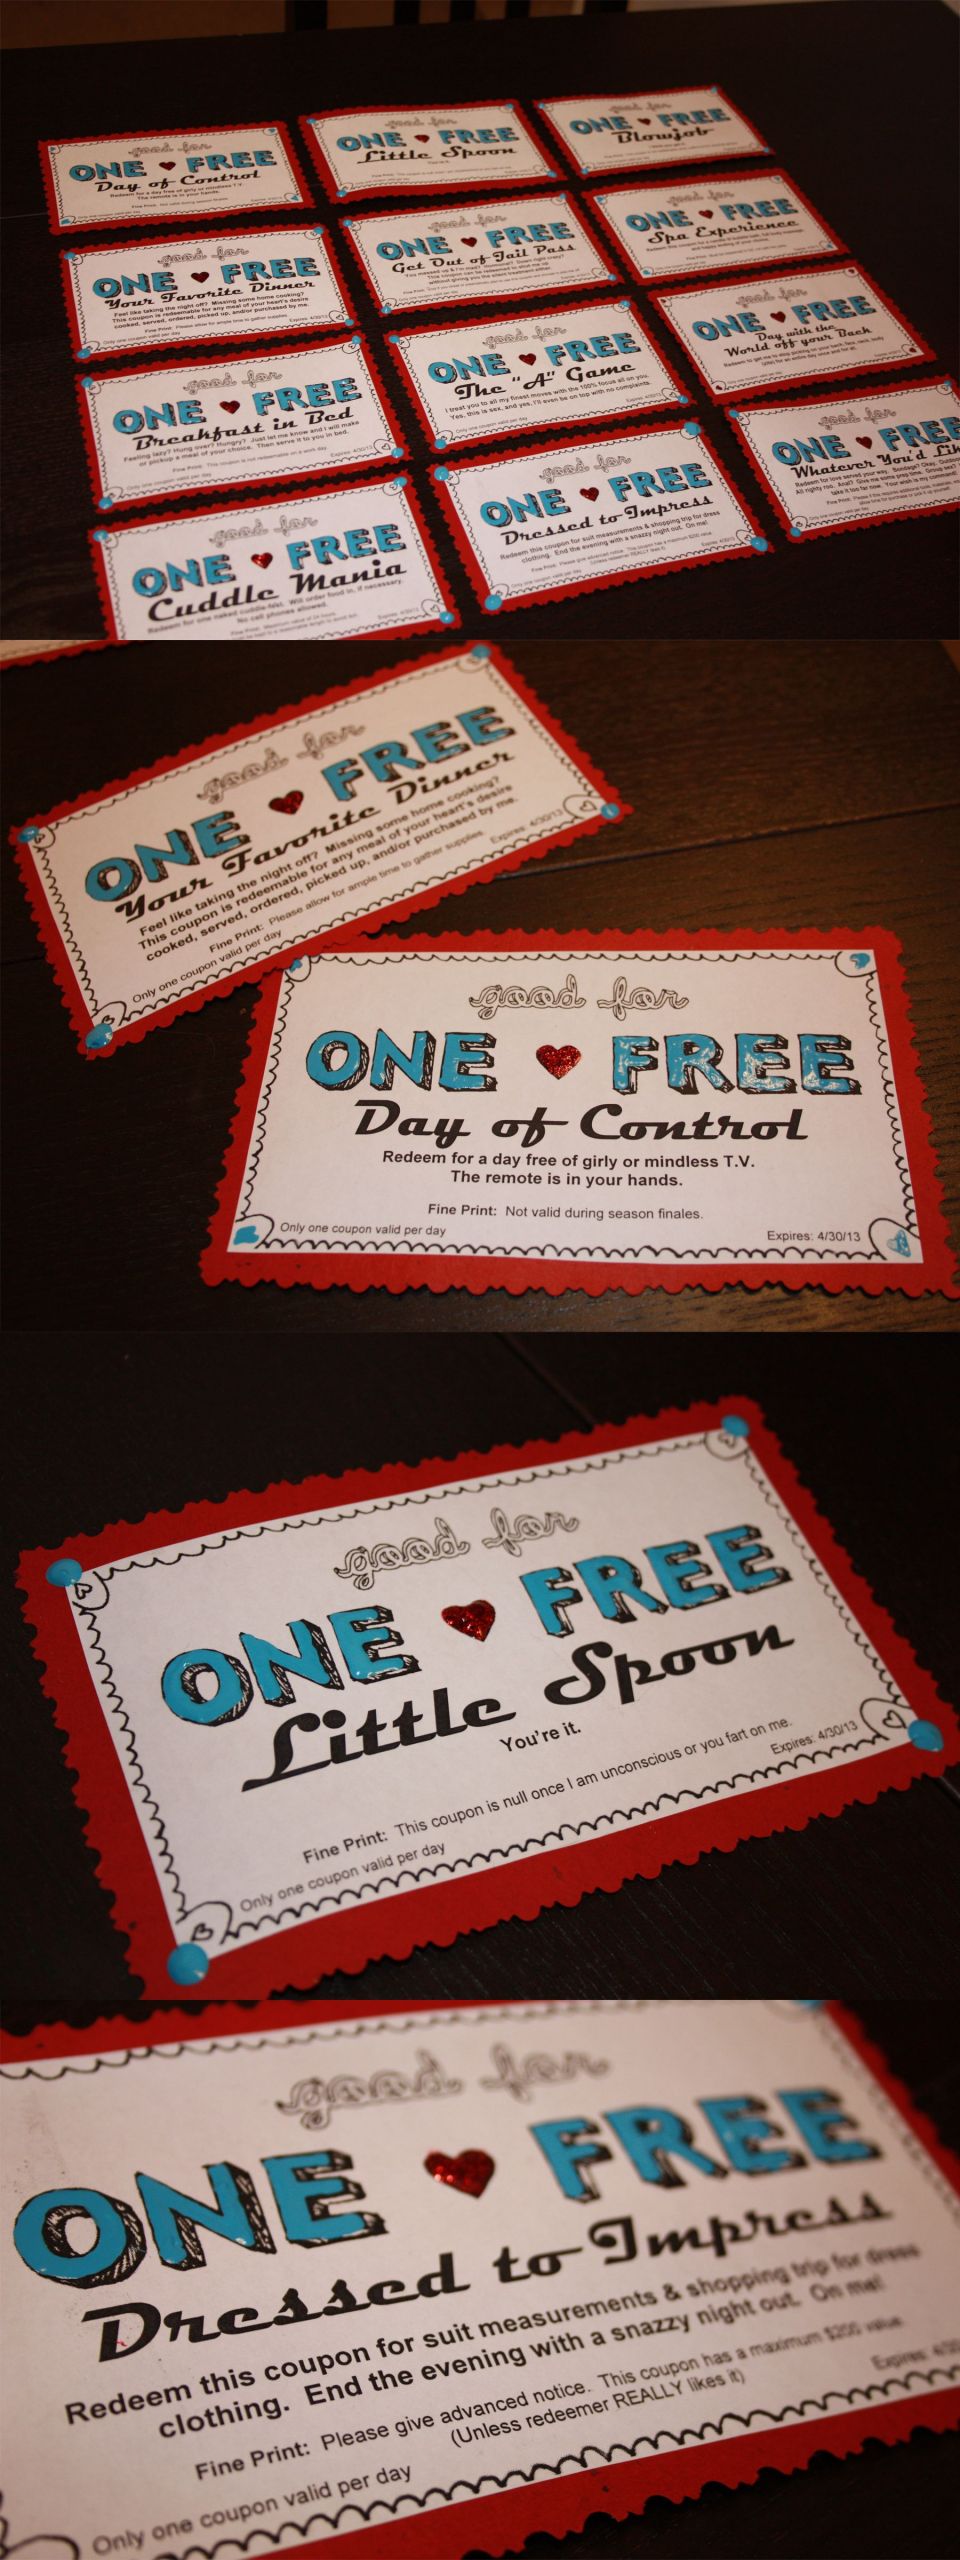 Cute Gift Ideas For Boyfriend
 coupons I made for my boyfriend s birthday e free meal